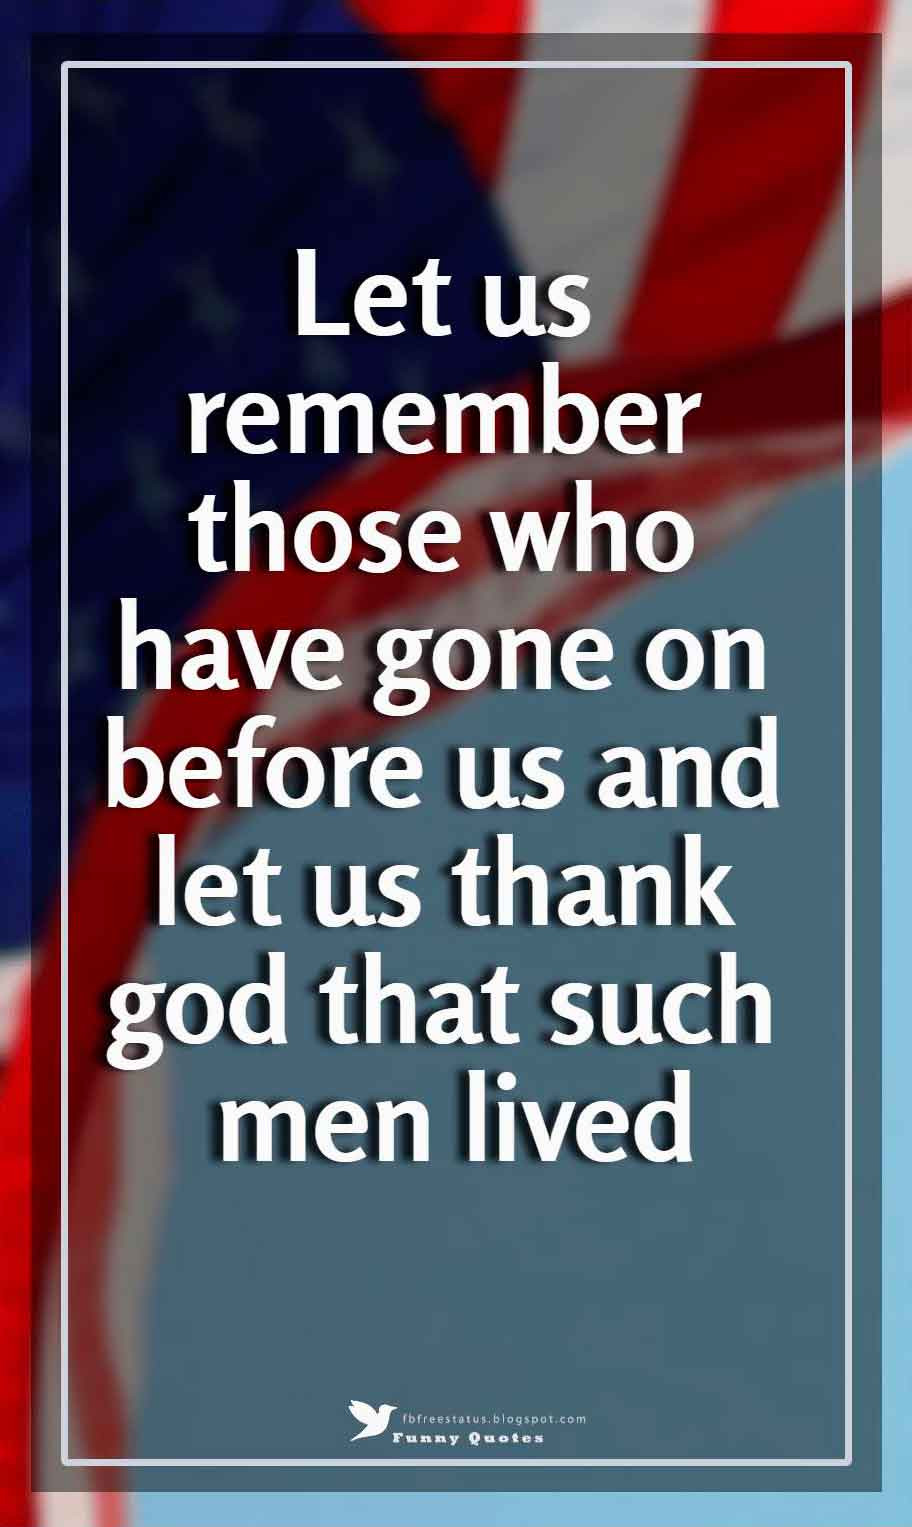 Inspirational Quotes For Memorial Day
 Memorial Day Thank You Quotes & Sayings